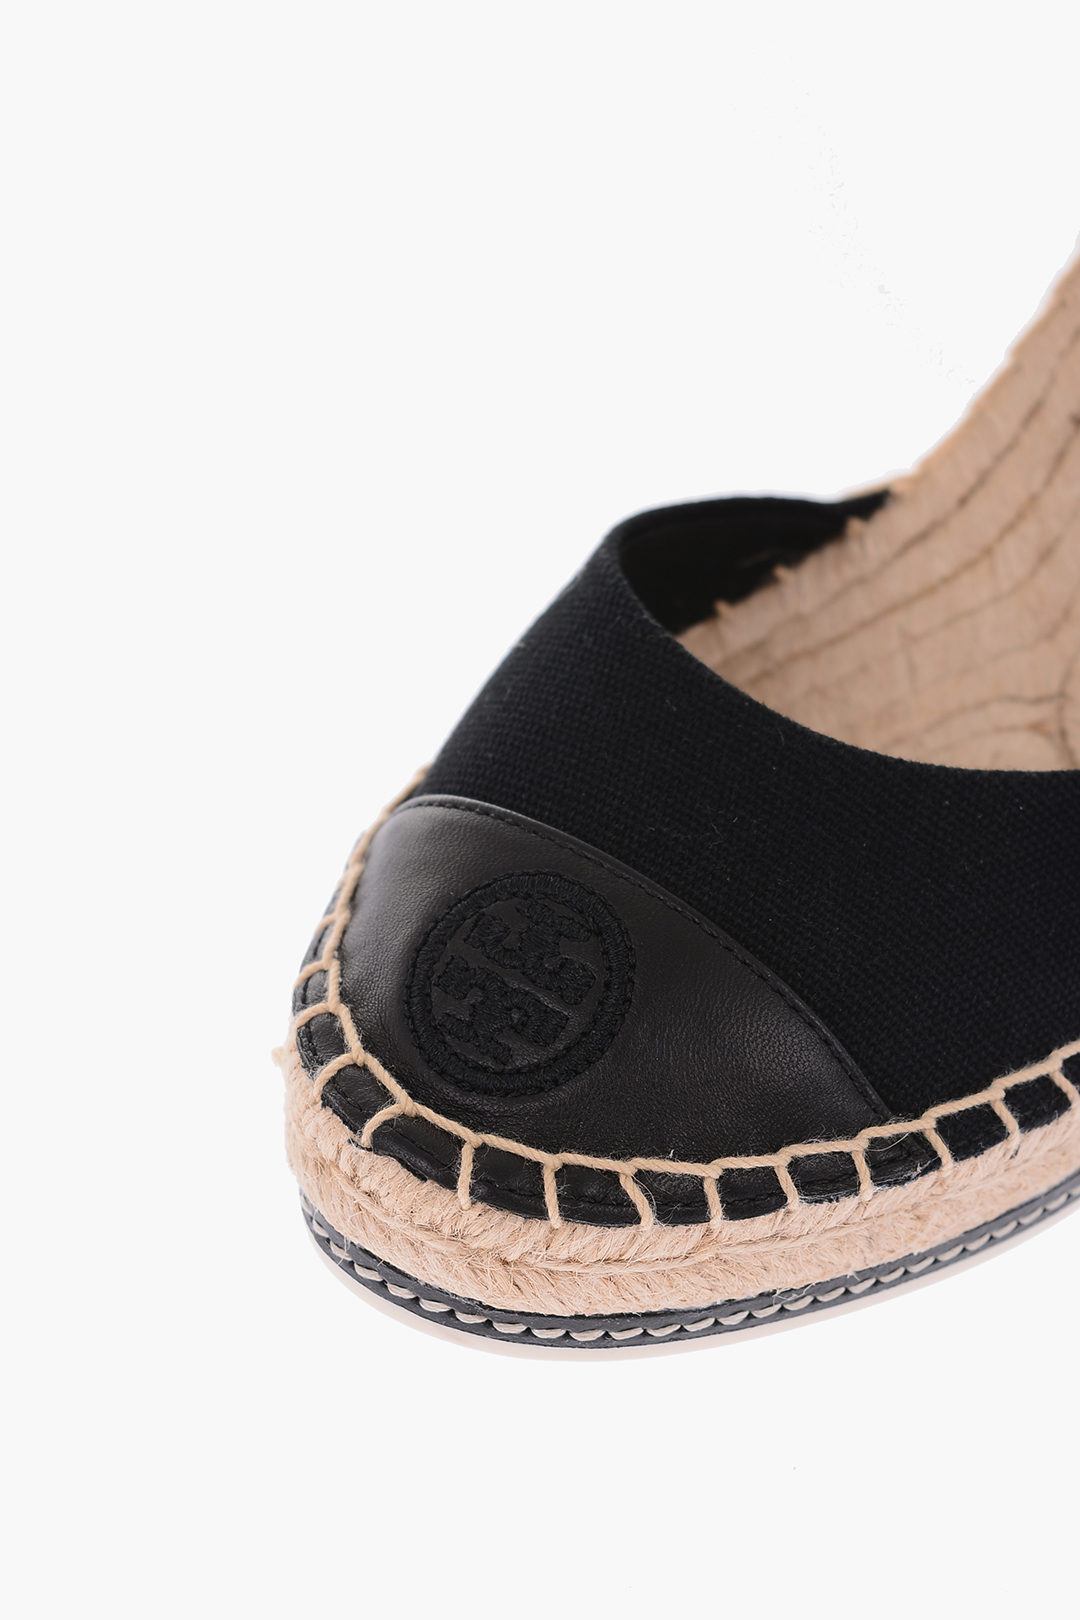 Tory Burch  leather and fabric Wedge espadrilles women - Glamood Outlet